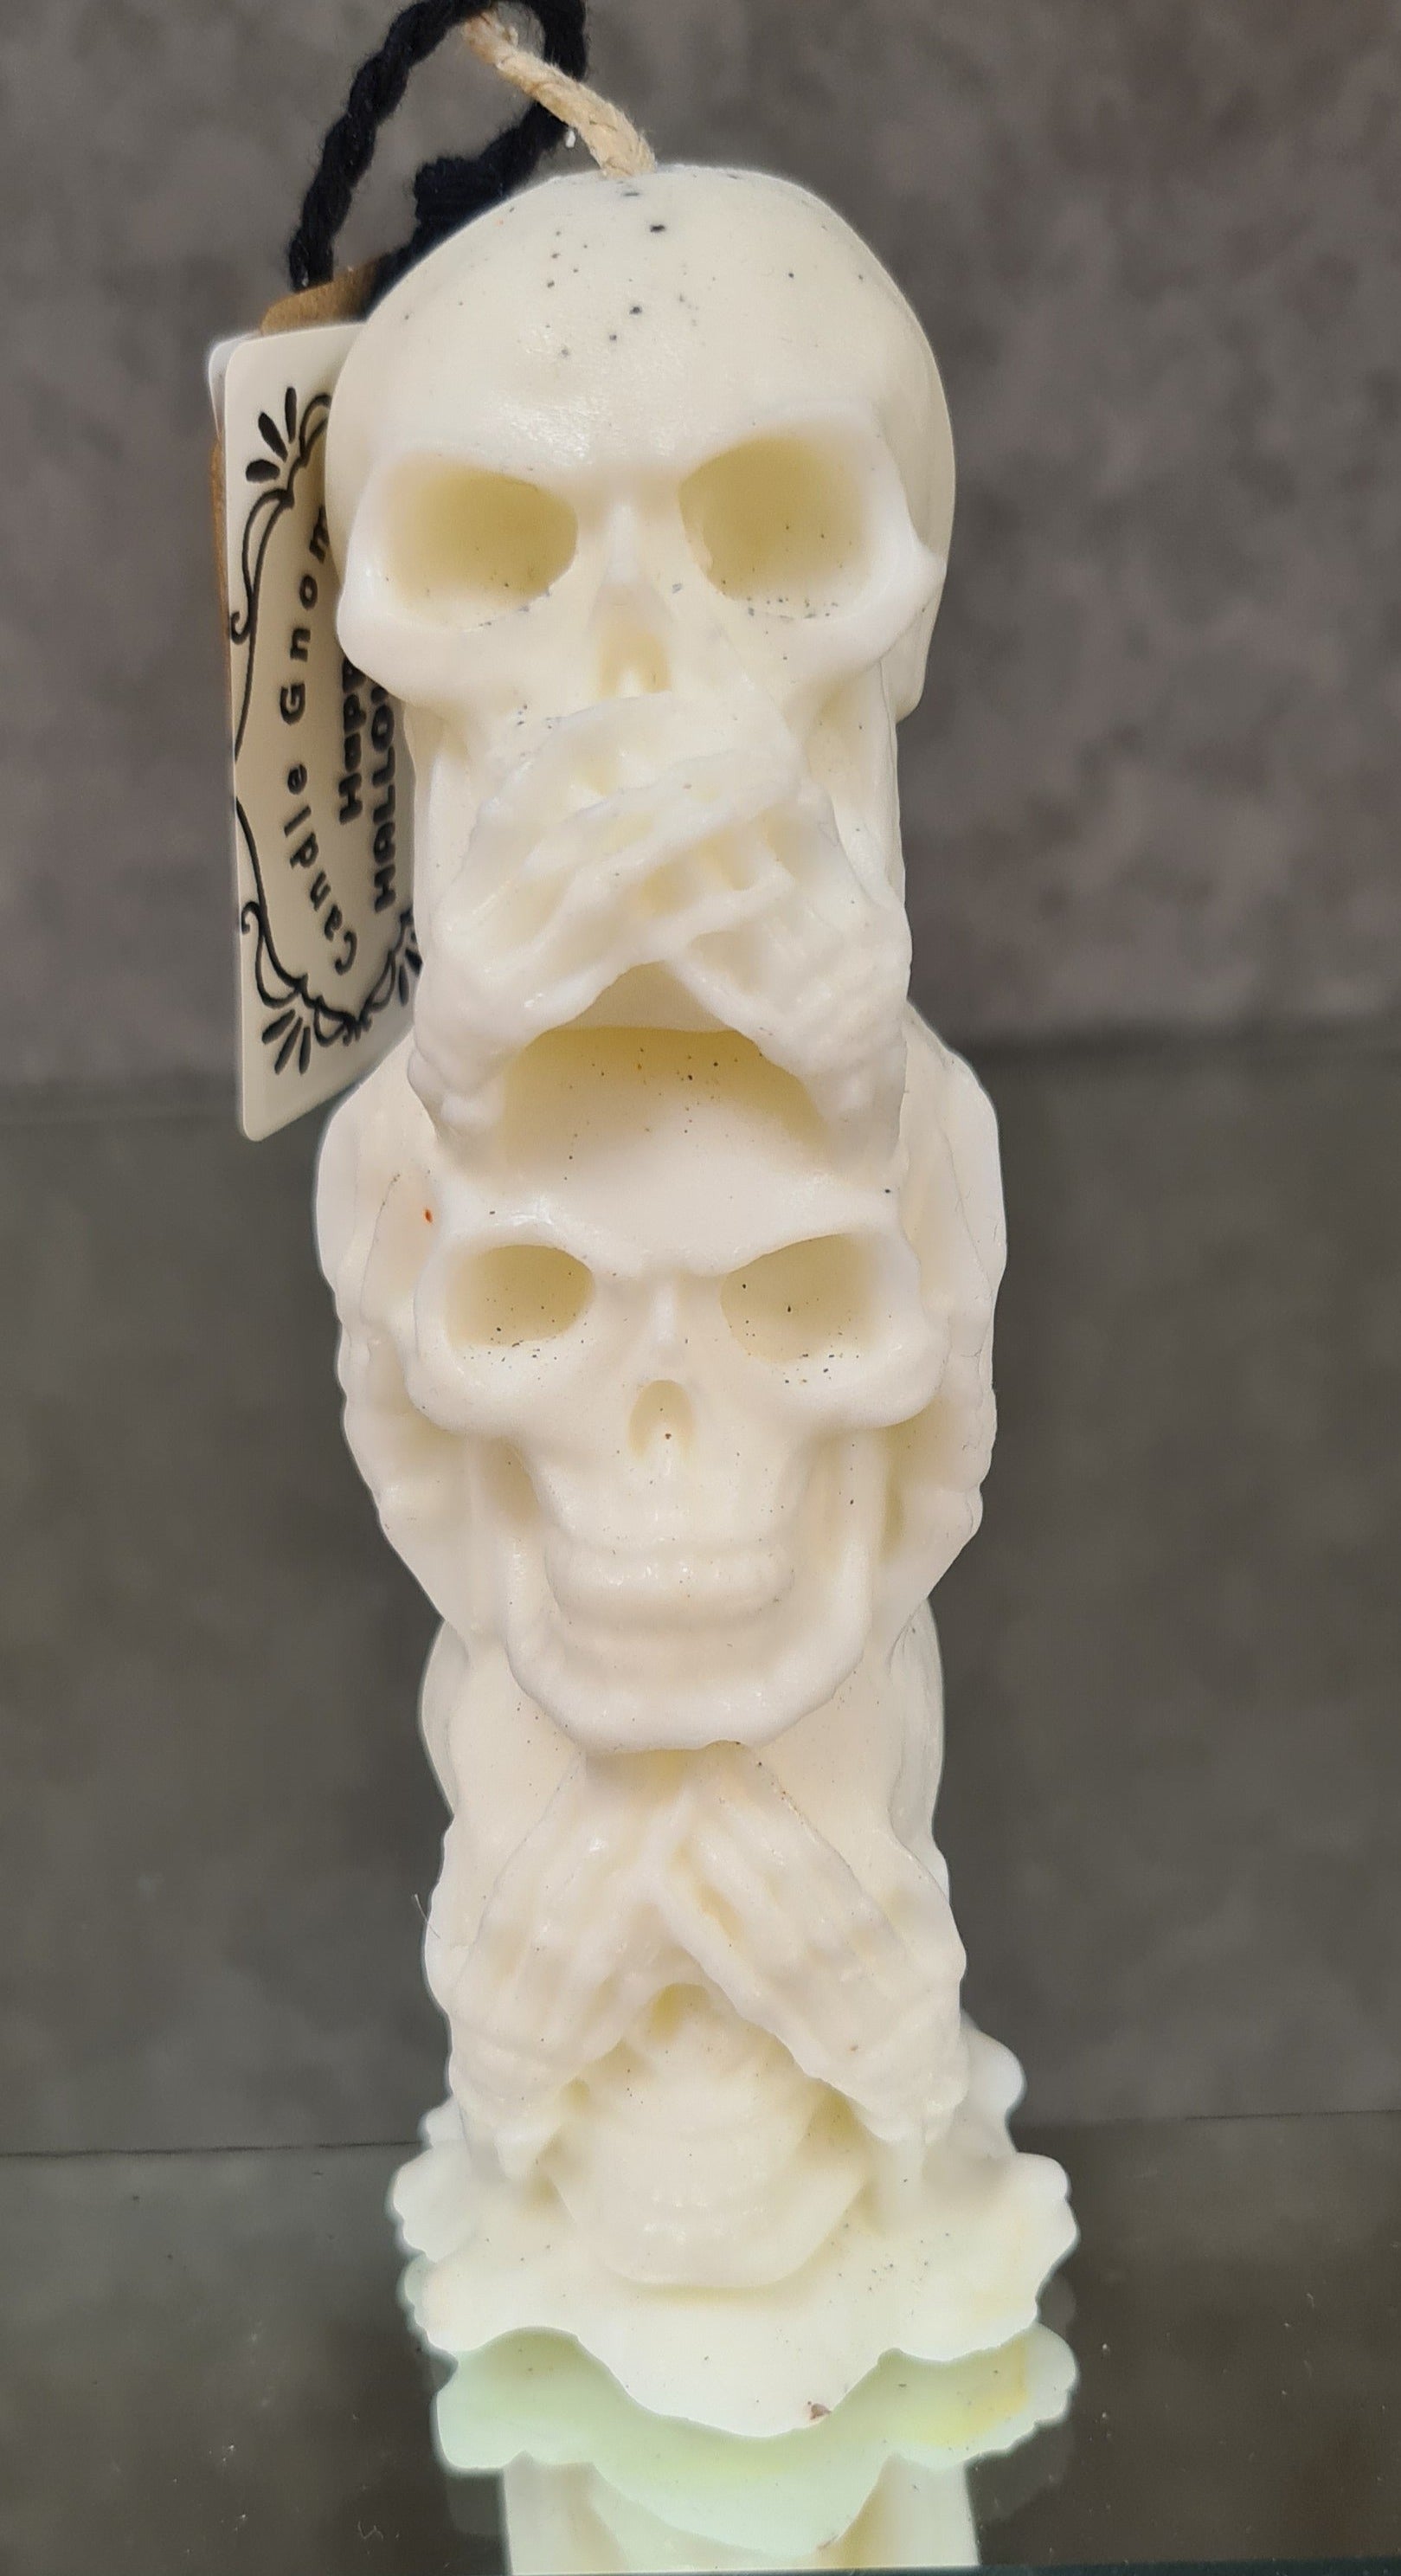 Candle trio with cascading skulls in a magical setting.